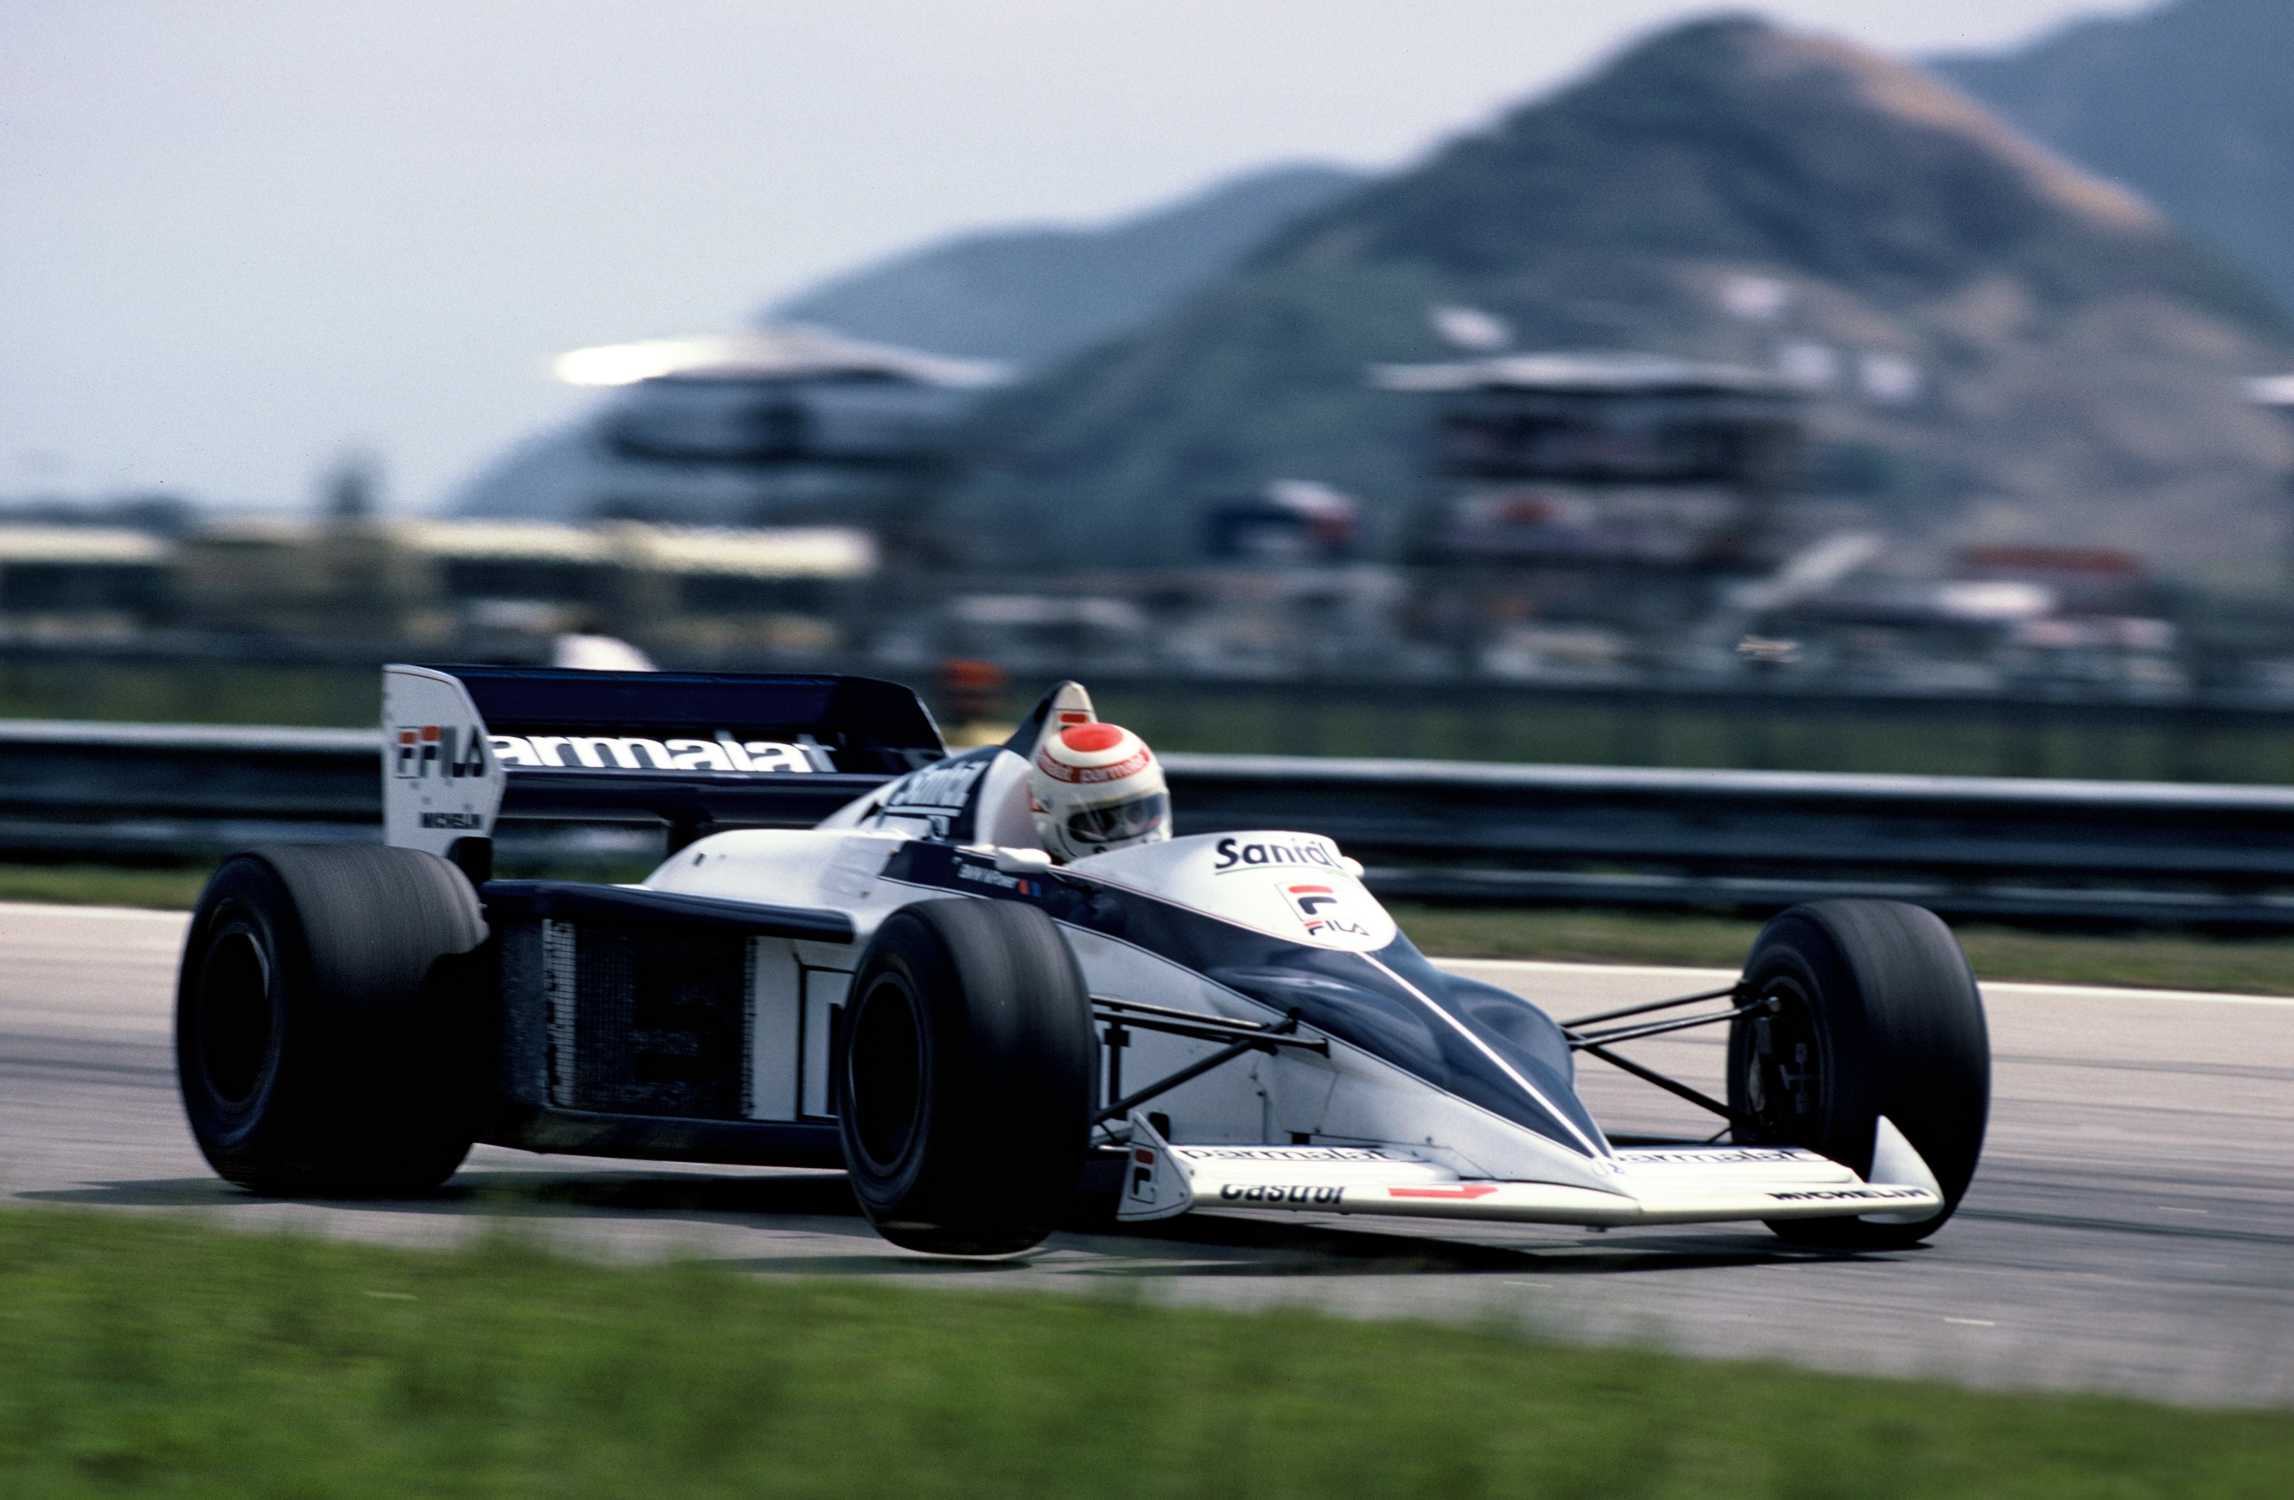 https://mediapool.bmwgroup.com/cache/P9/201205/P90095015/P90095015-nelson-piquet-during-the-gp-of-brazil-1983-in-the-brabham-bmw-bt-52-05-2012-2294px.jpg